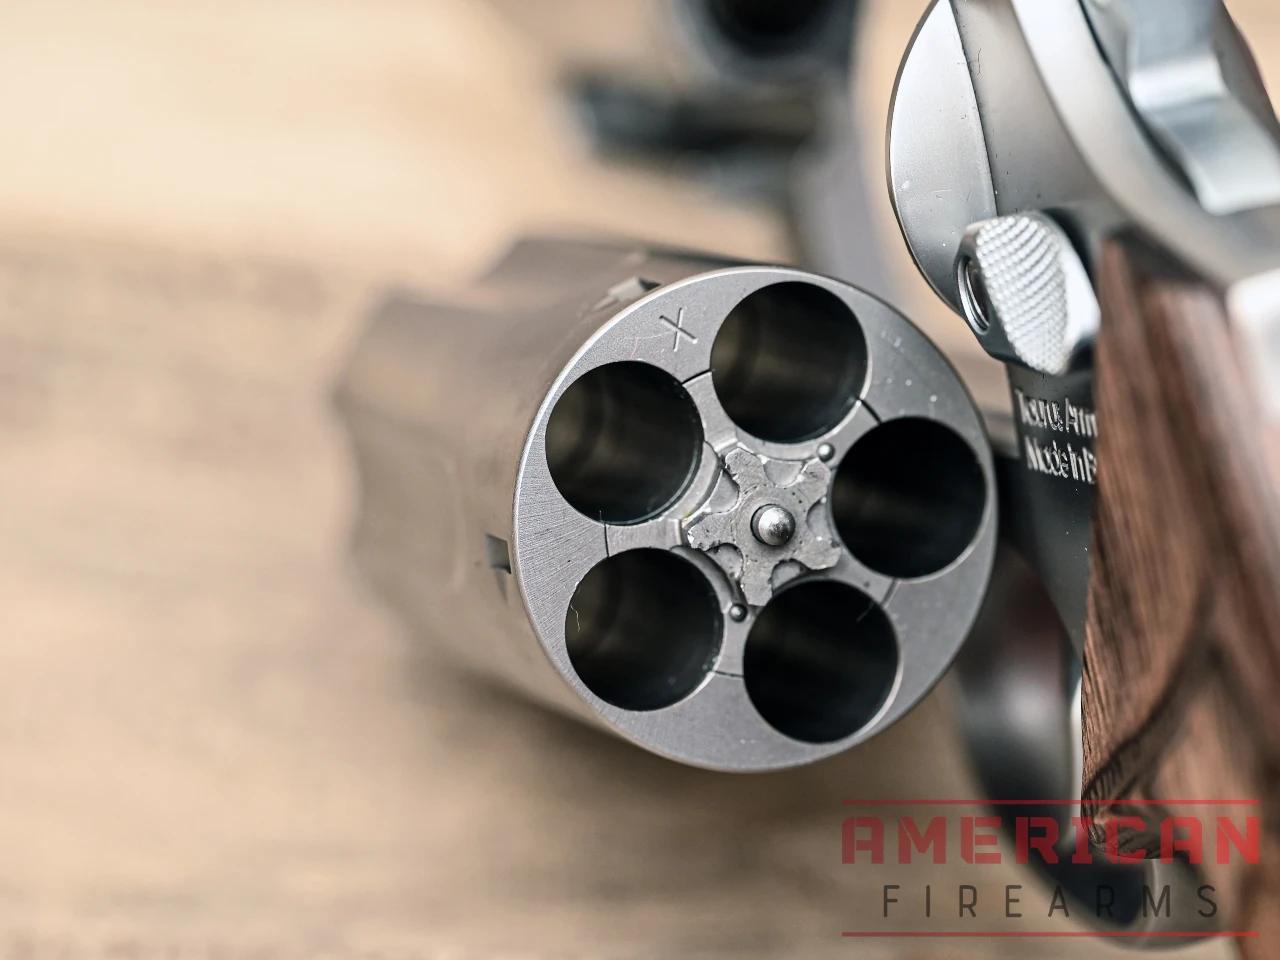 You can run five .45 Colt, .410 shells or any combo of the two.